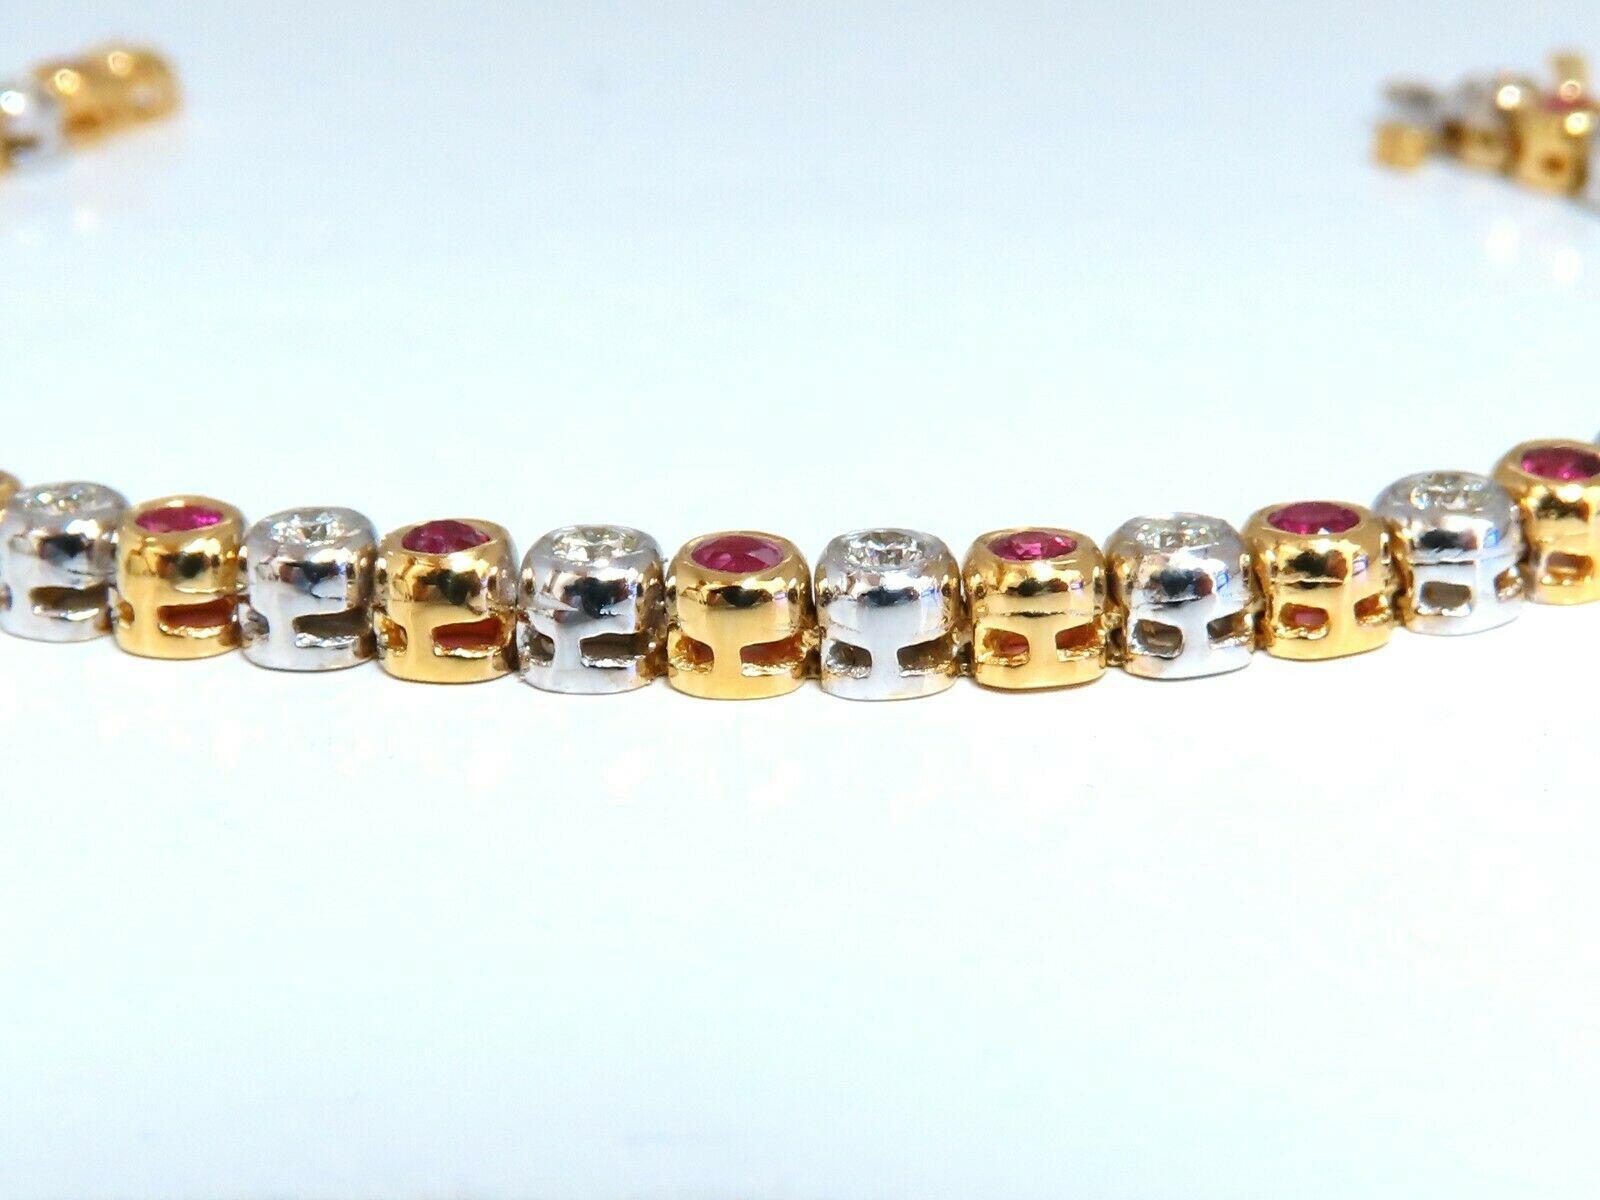 Ruby & Classic Alternating Tennis.

2.24ct. Natural ruby bracelet.

Rounds, full cuts 

Clean clarity

Transparent & Vivid Reds.

Average 2.3mm each

1.60ct Diamonds

Rounds & full cuts

Vs-2 clarity.

I-color

14kt. yellow / white gold 

15.4